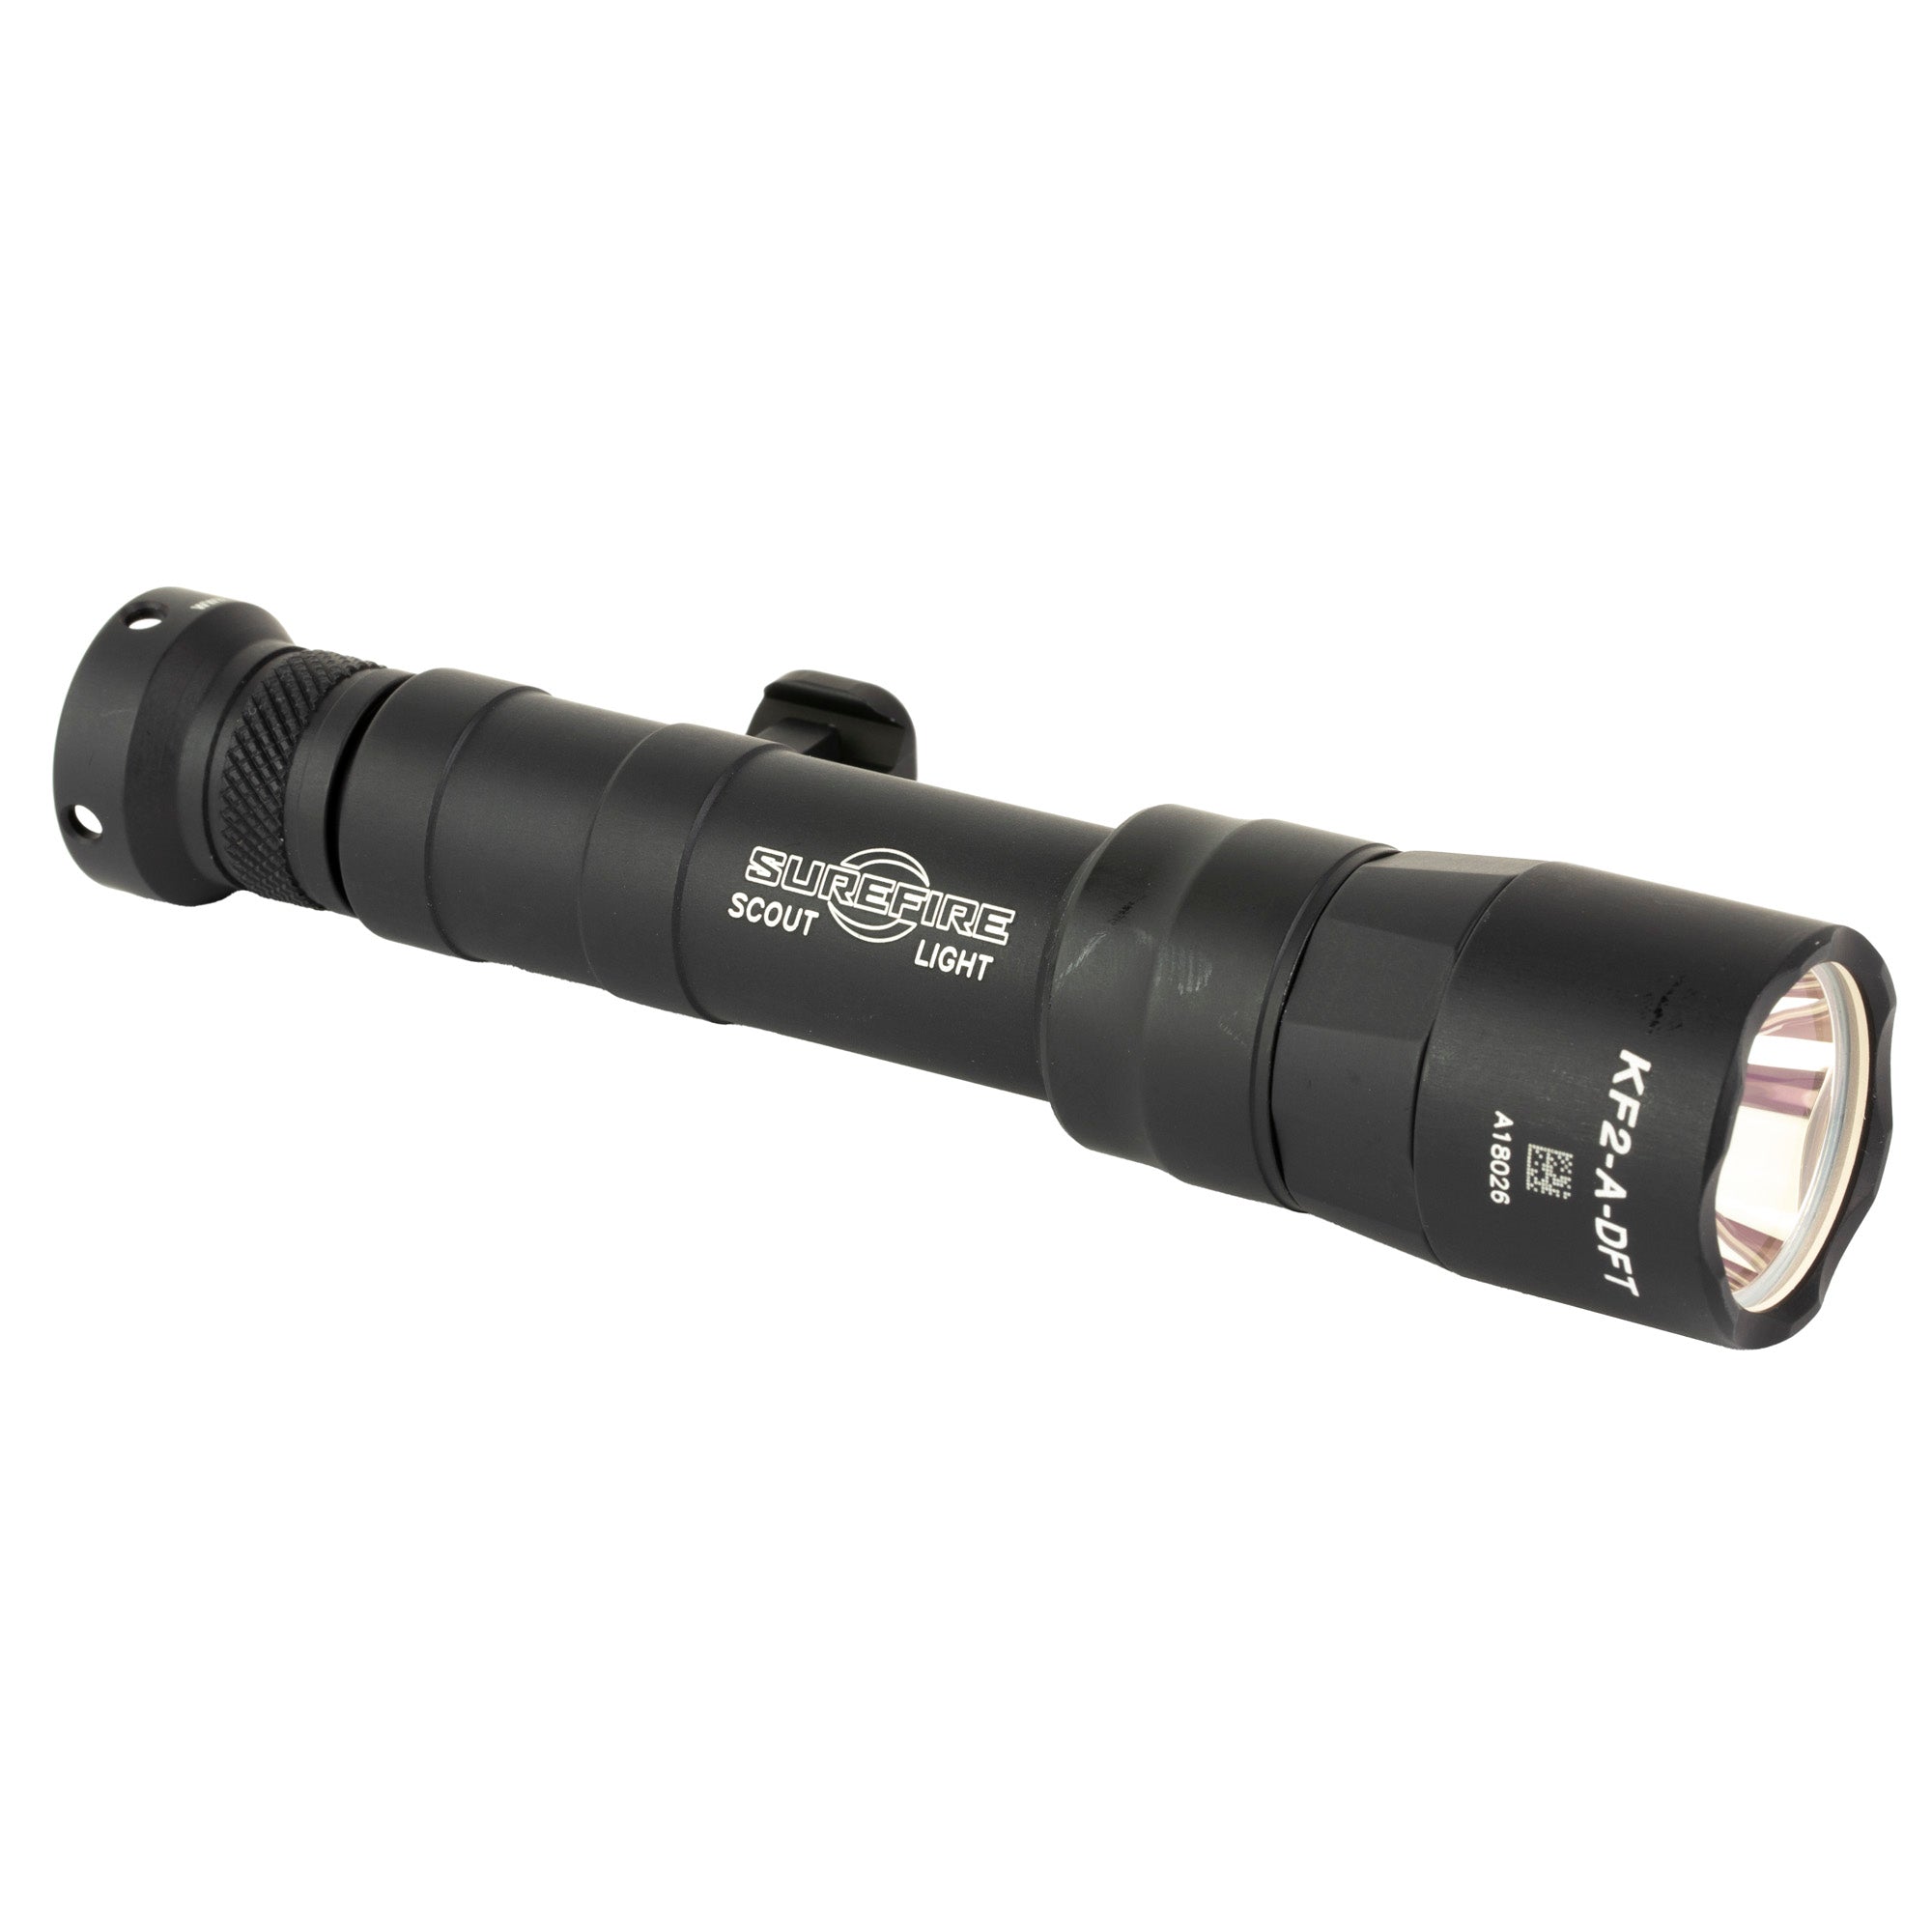 Surefire M640DFT Turbo Scout Light Pro in black, featuring 1000 lumens and dual fuel technology, mounted with an MLOK adapter, and includes a 18650 rechargeable battery